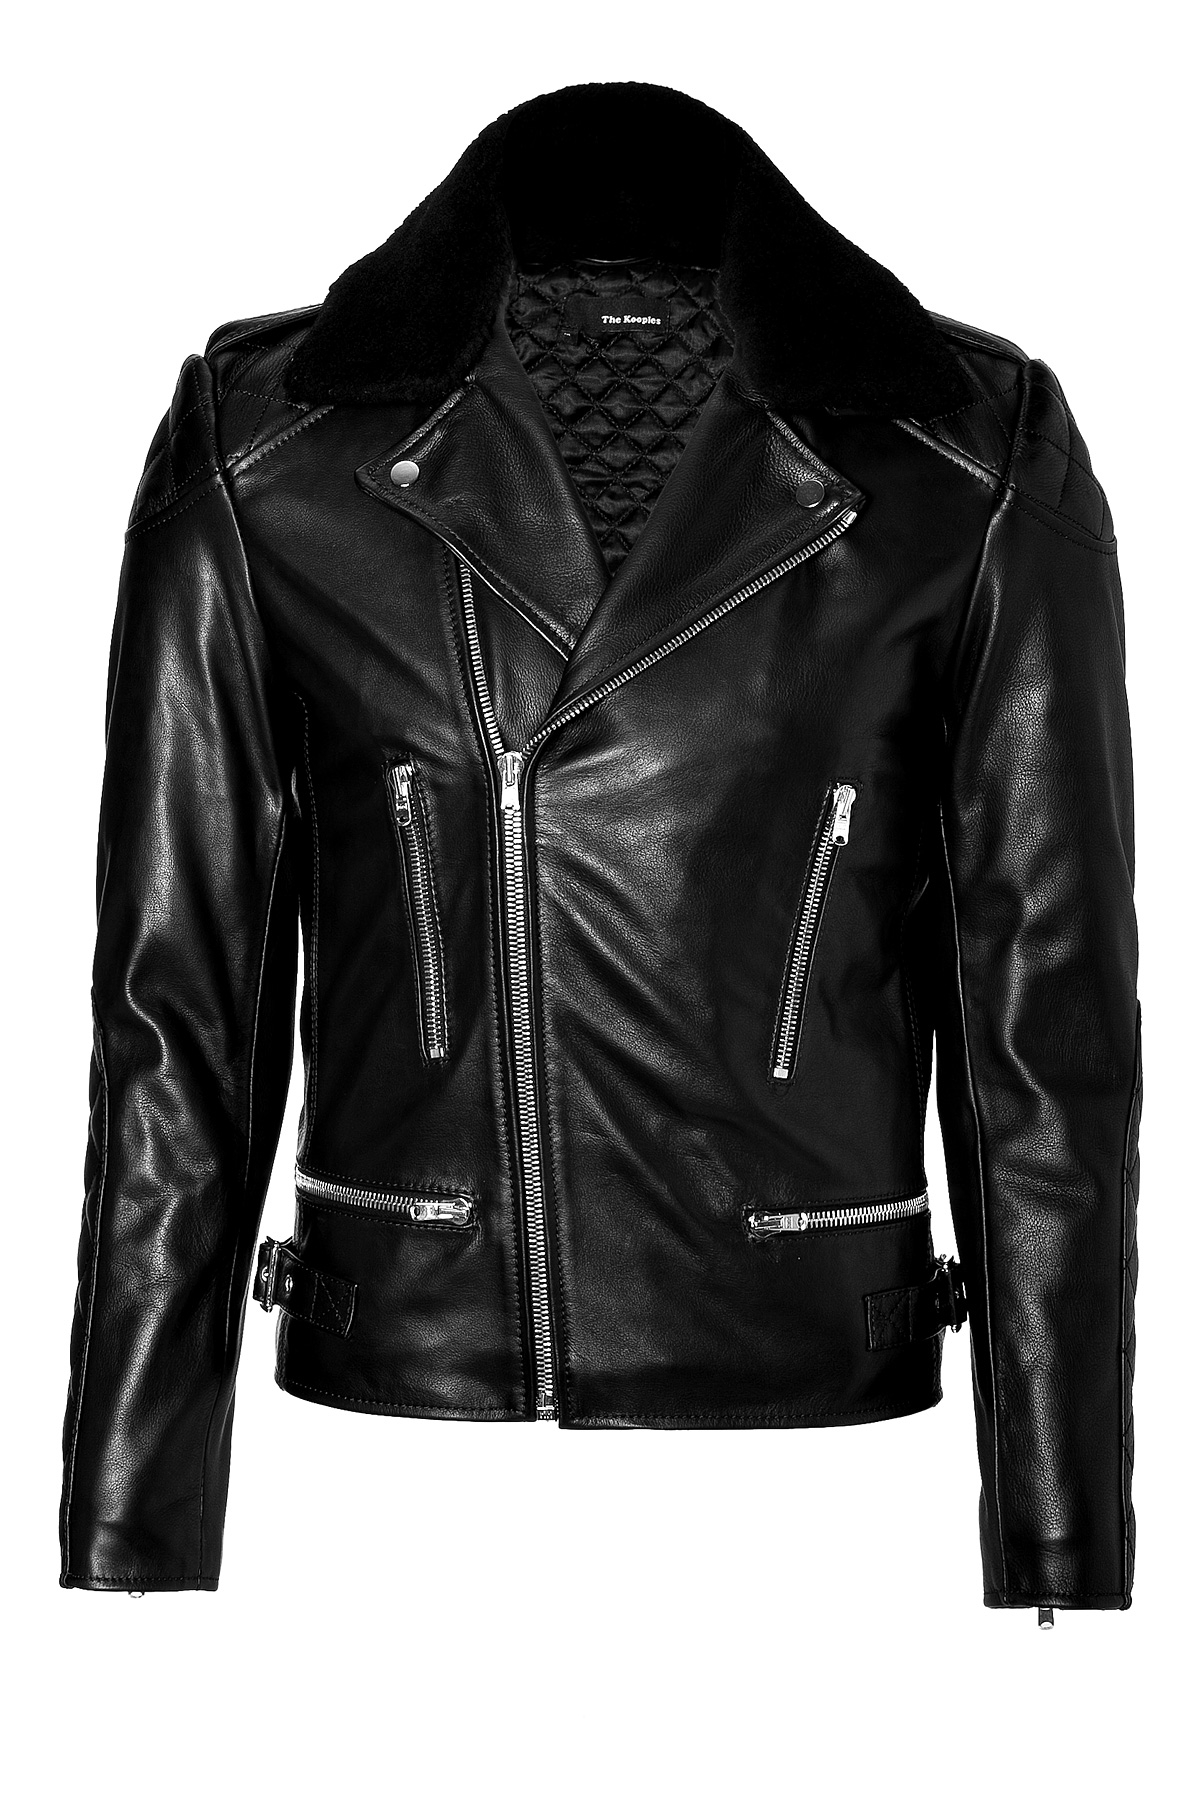 Lyst - The Kooples Leather Biker Jacket With Quilted Lining in Black ...